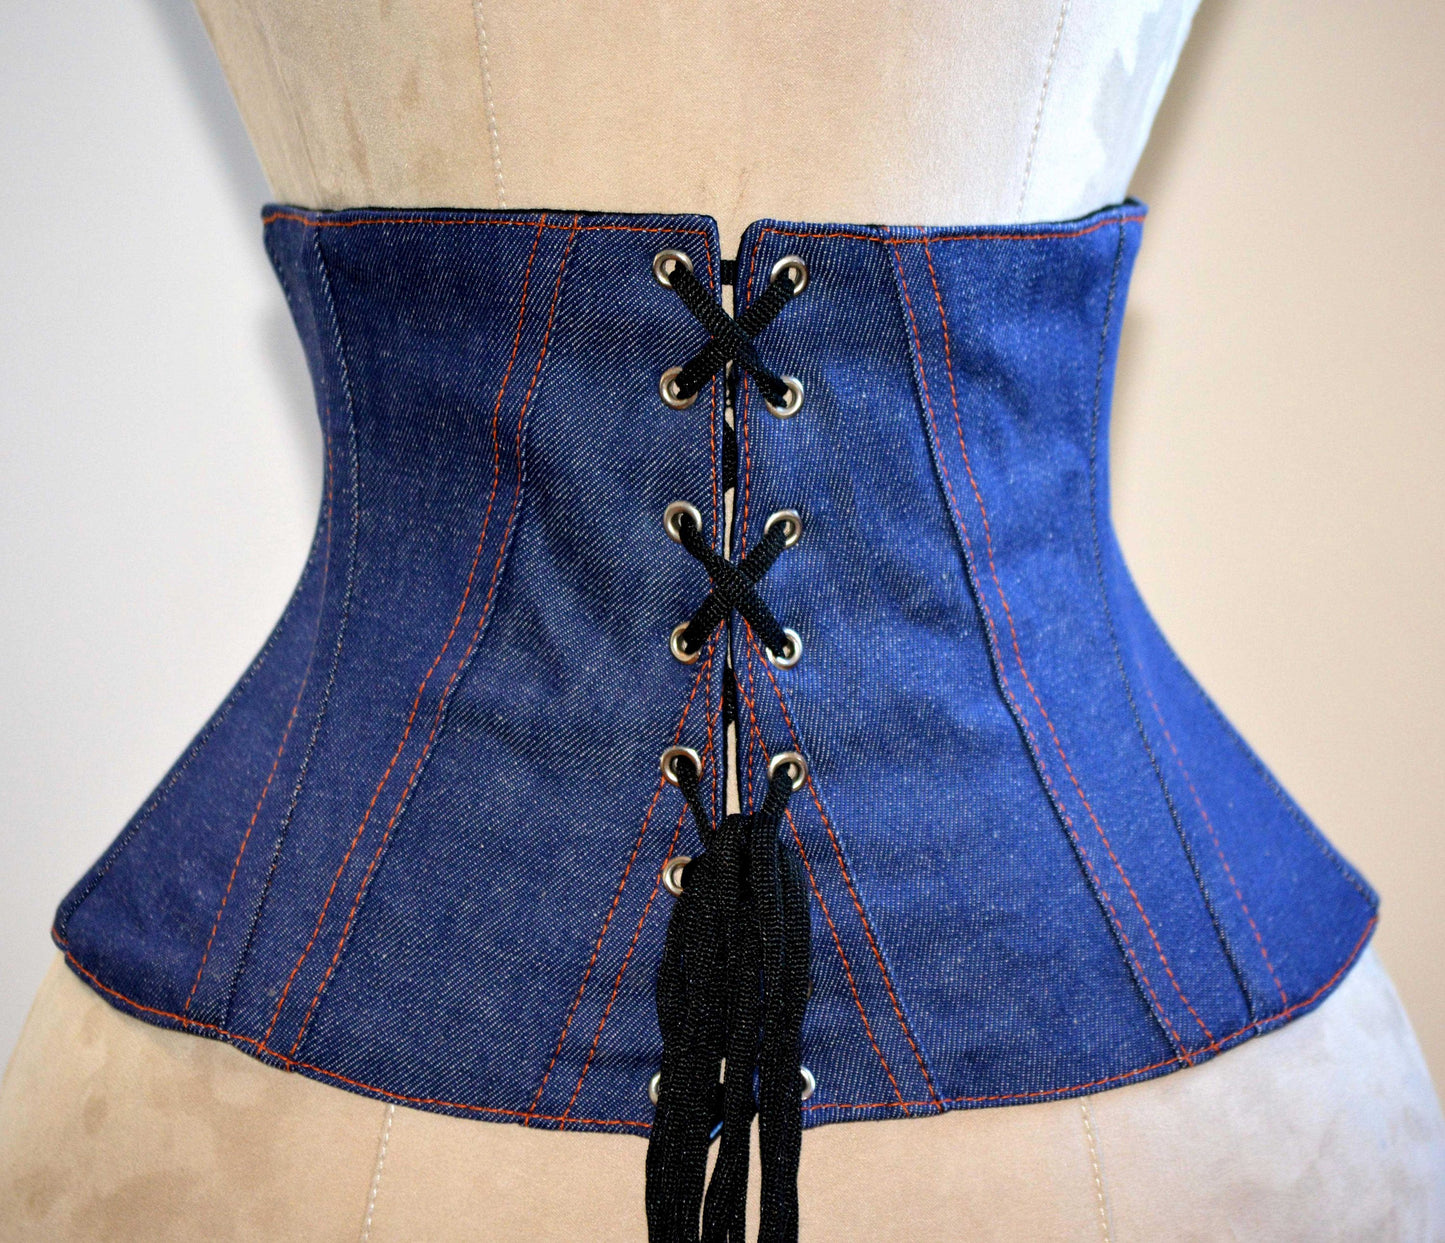 Denim Waist Steel-boned Authentic Corset. Corsettery Western Collection.  Tight Lacing and Waist Training, Steampunk, Gothic, Pirate -  Canada